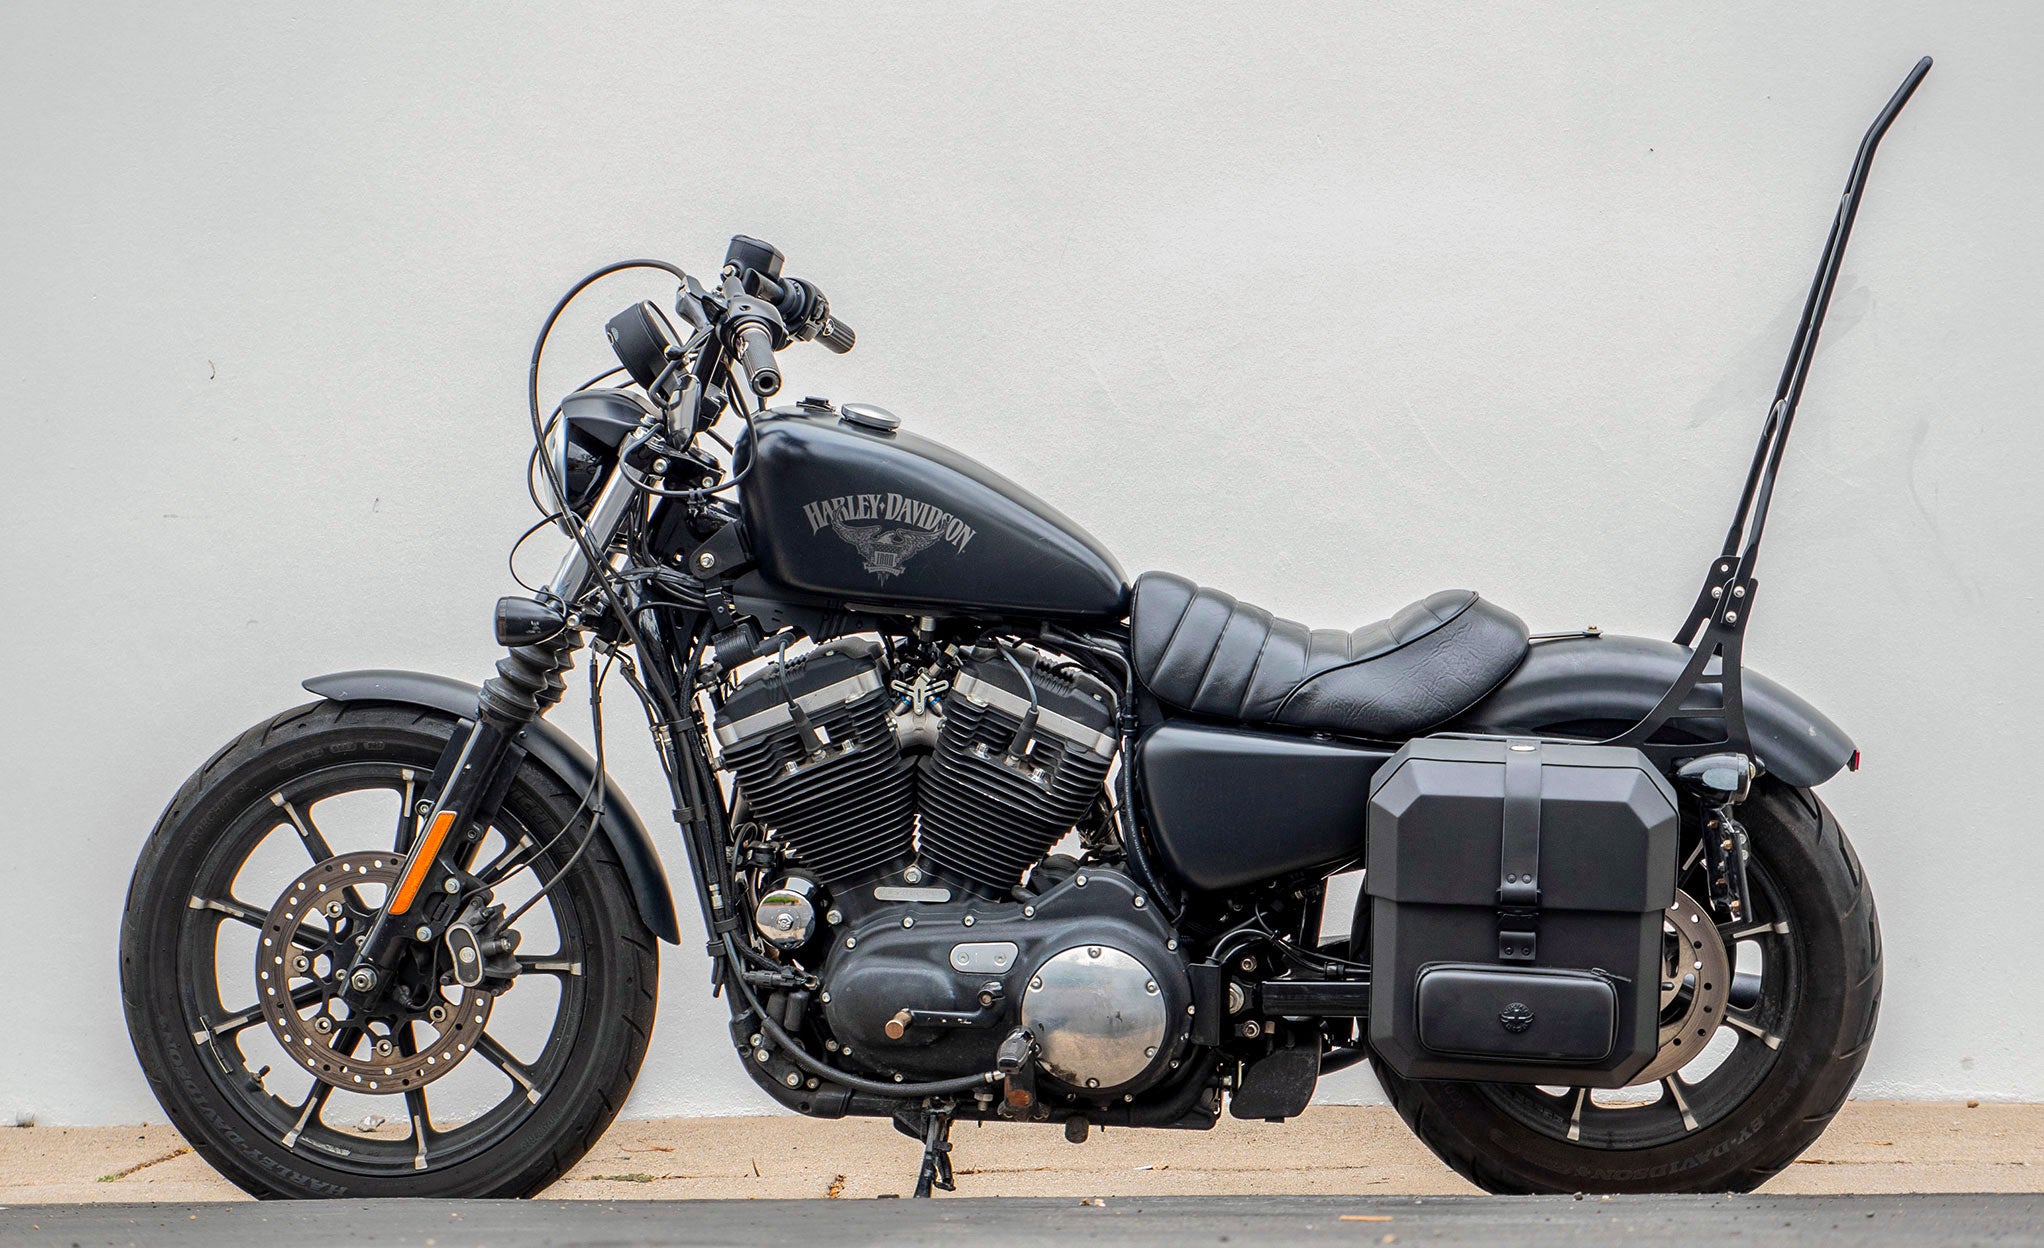 15L - Outlaw Quick Mount Medium Harley Sportster 883 Iron XL883N Hard Solo Saddlebag (Left Only) @expand